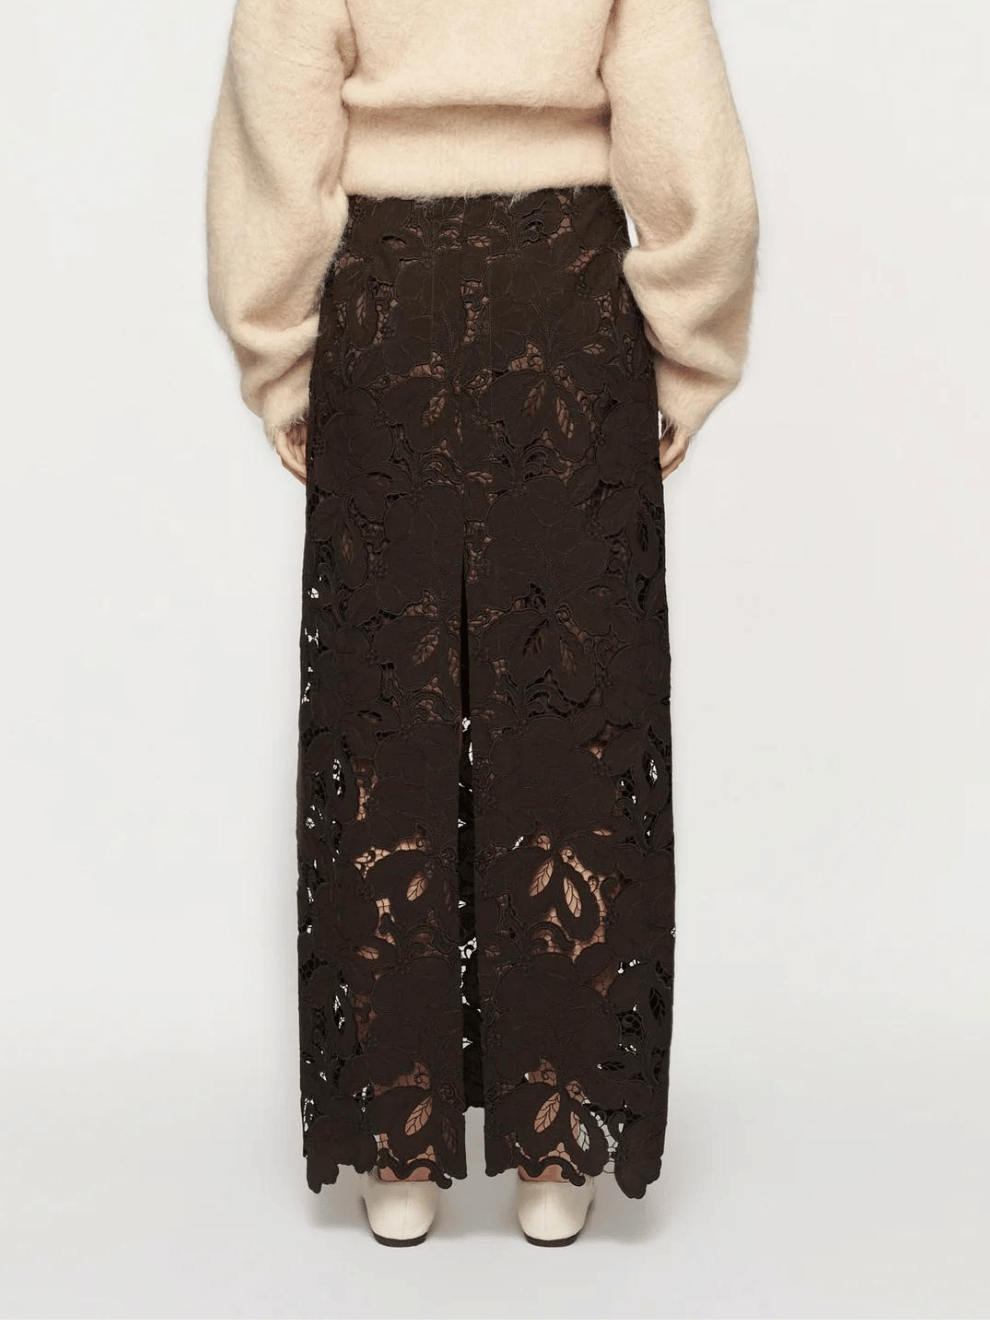 PRE-ORDER Morgan Skirt in Bitter Chocolate Lace